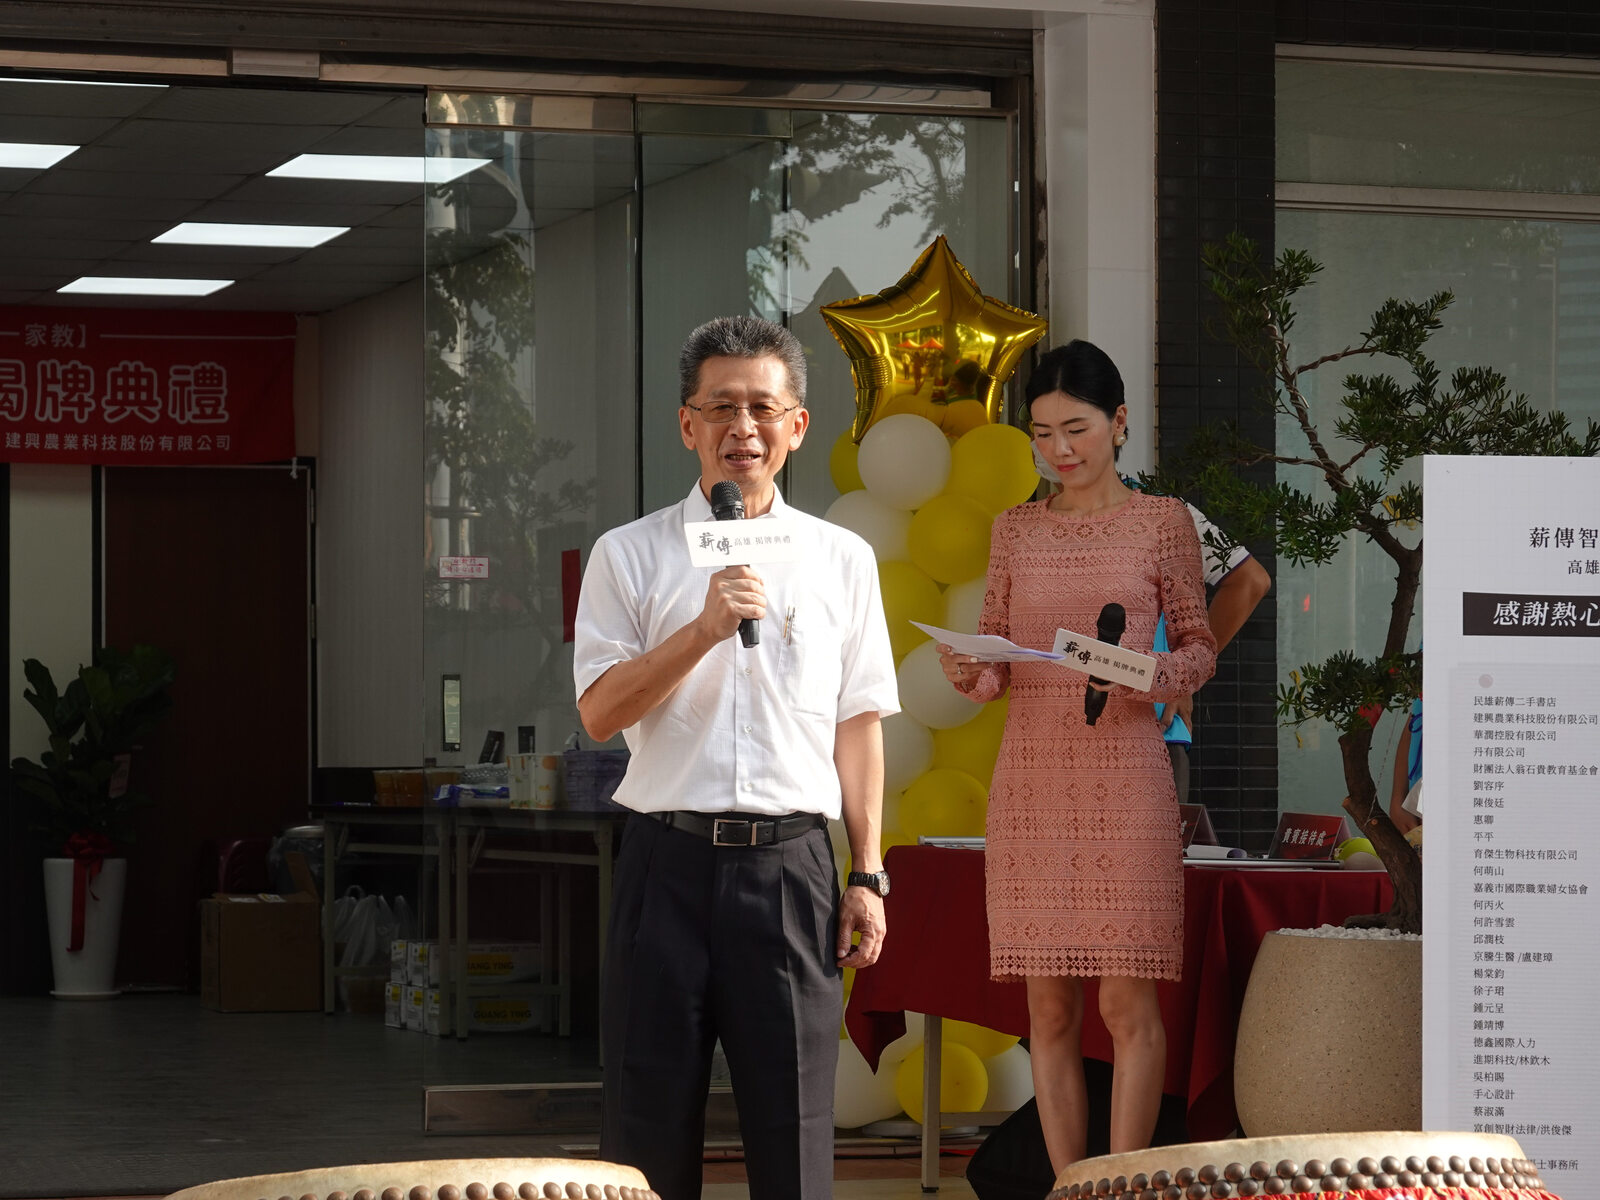 Prof. Jui-Kun Kuo, the Associate Dean of NSYSU College of Management, presented the opening remark for the ceremony